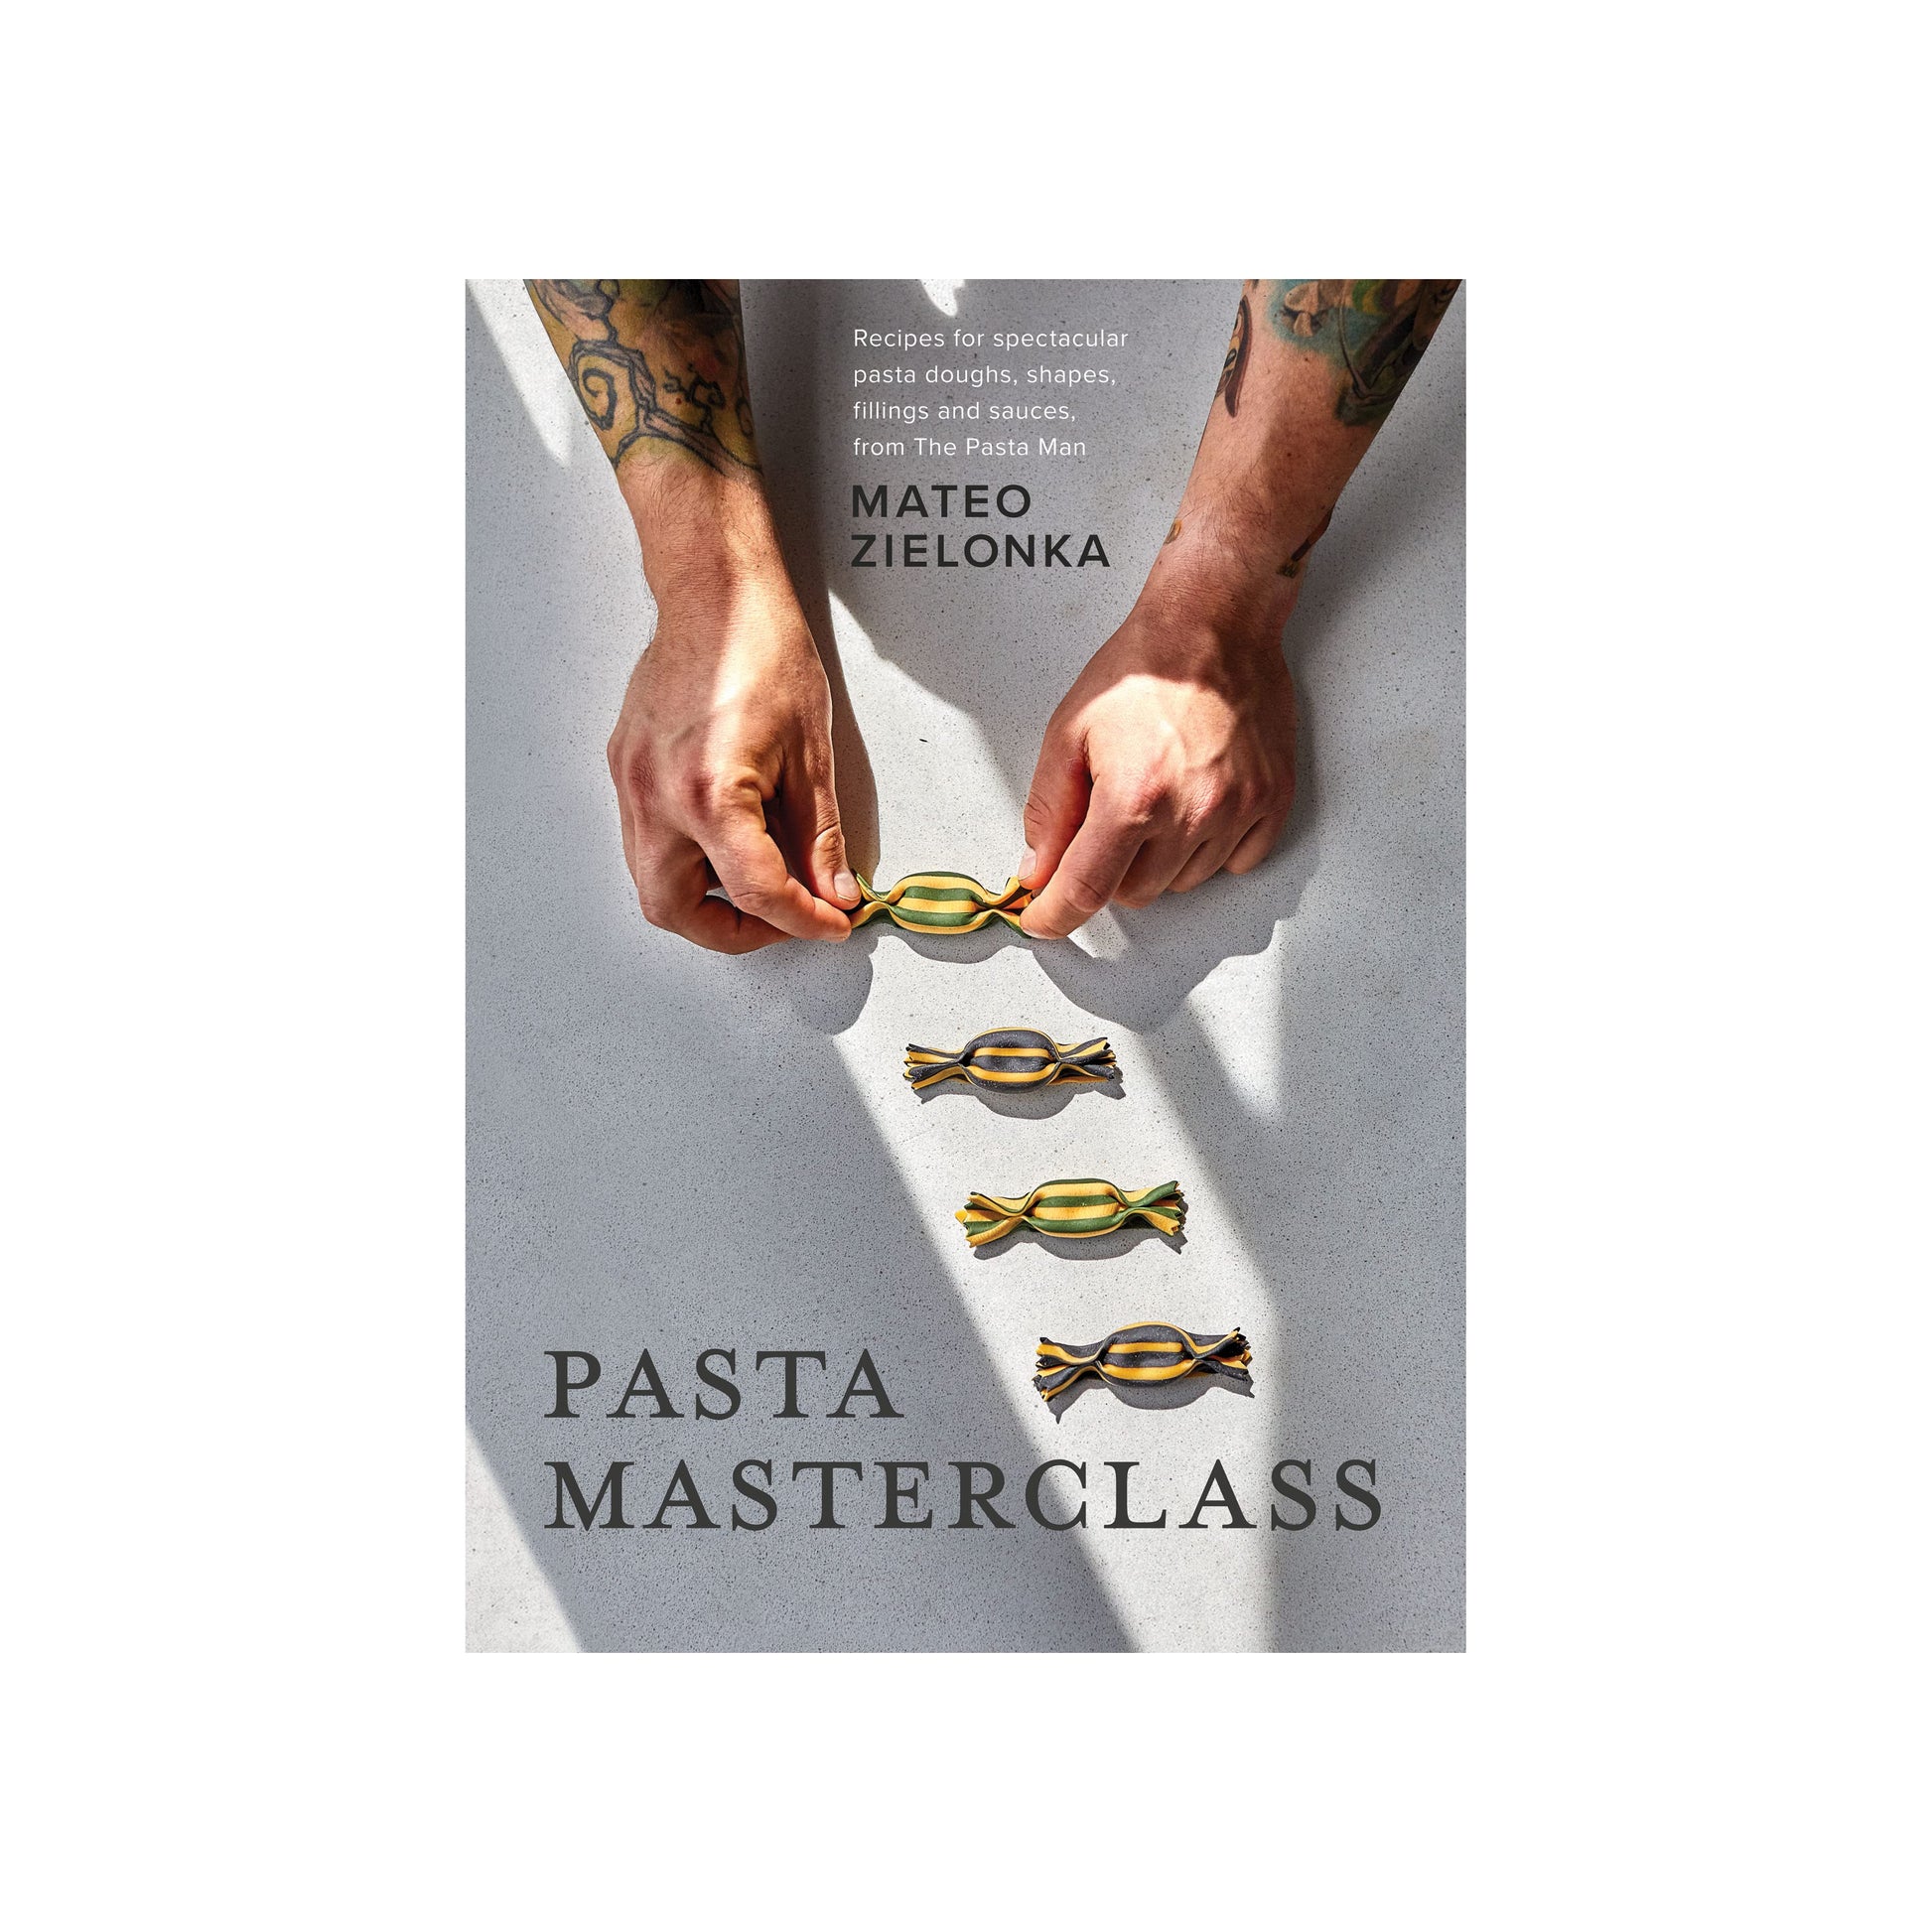 Pasta Masterclass: Recipes for Spectacular Pasta Doughs, Shapes, Fillings and Sauces from The Pasta Man